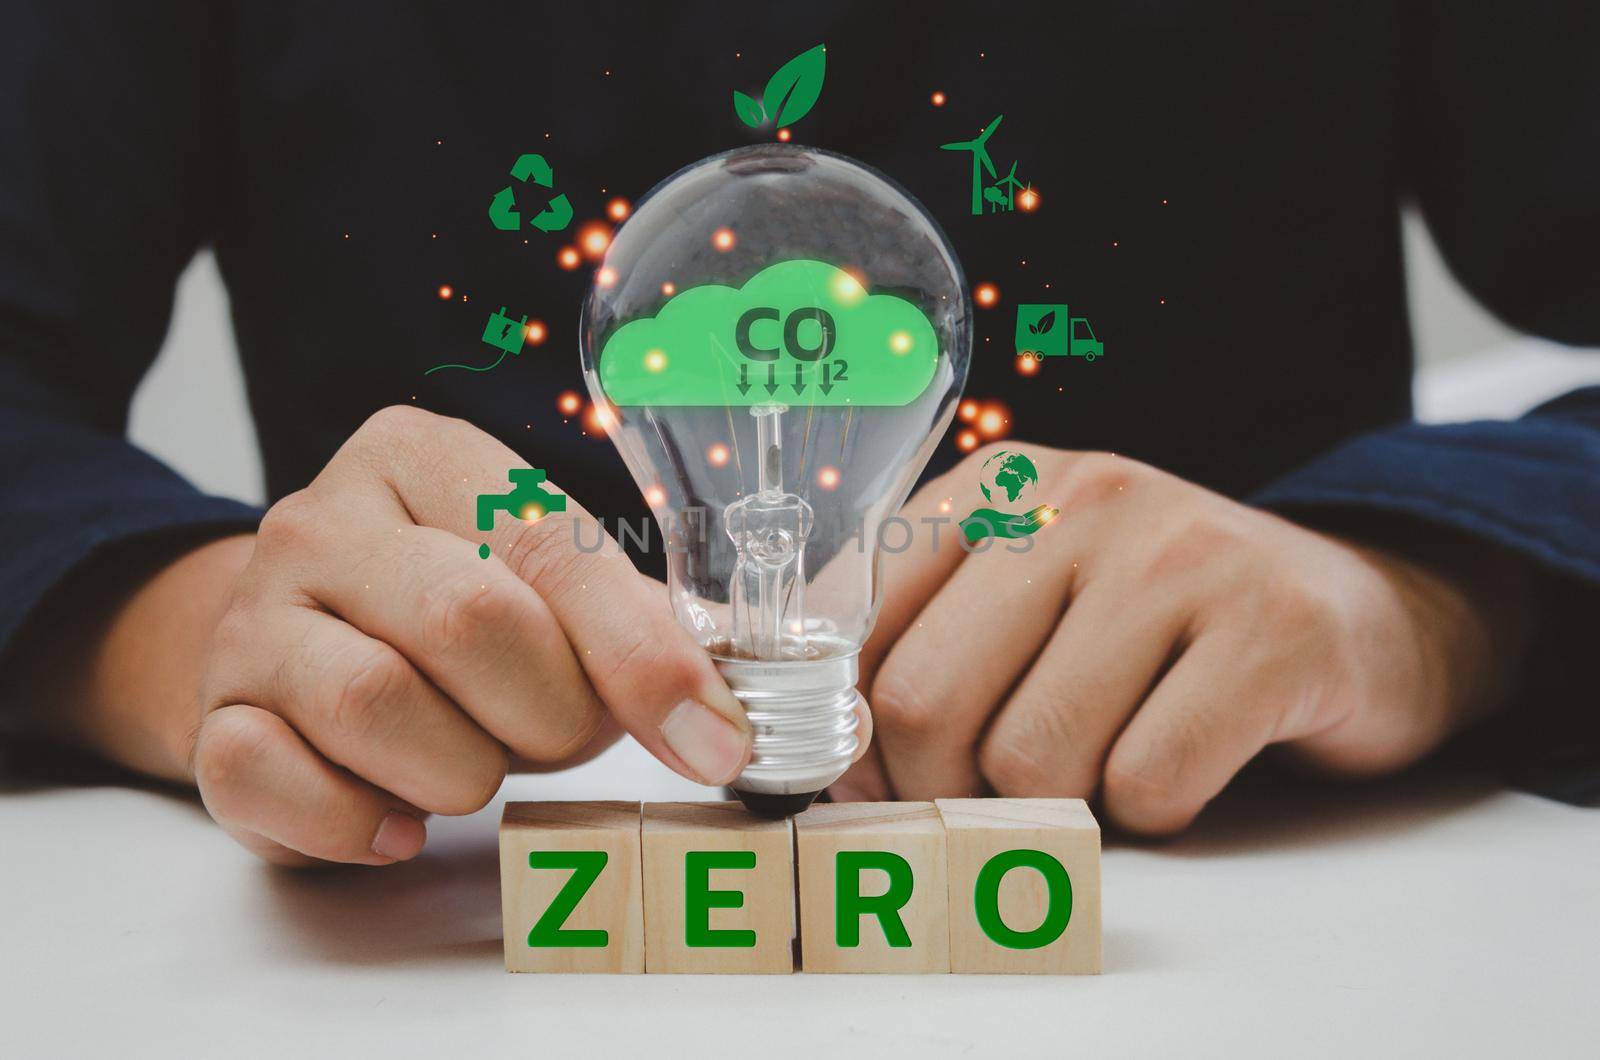 Net zero greenhouse gas emissions to as close to zero as possible, with any remaining emissions reabsorbed into the environment.Business eco innovation carbon target concept. by aoo3771